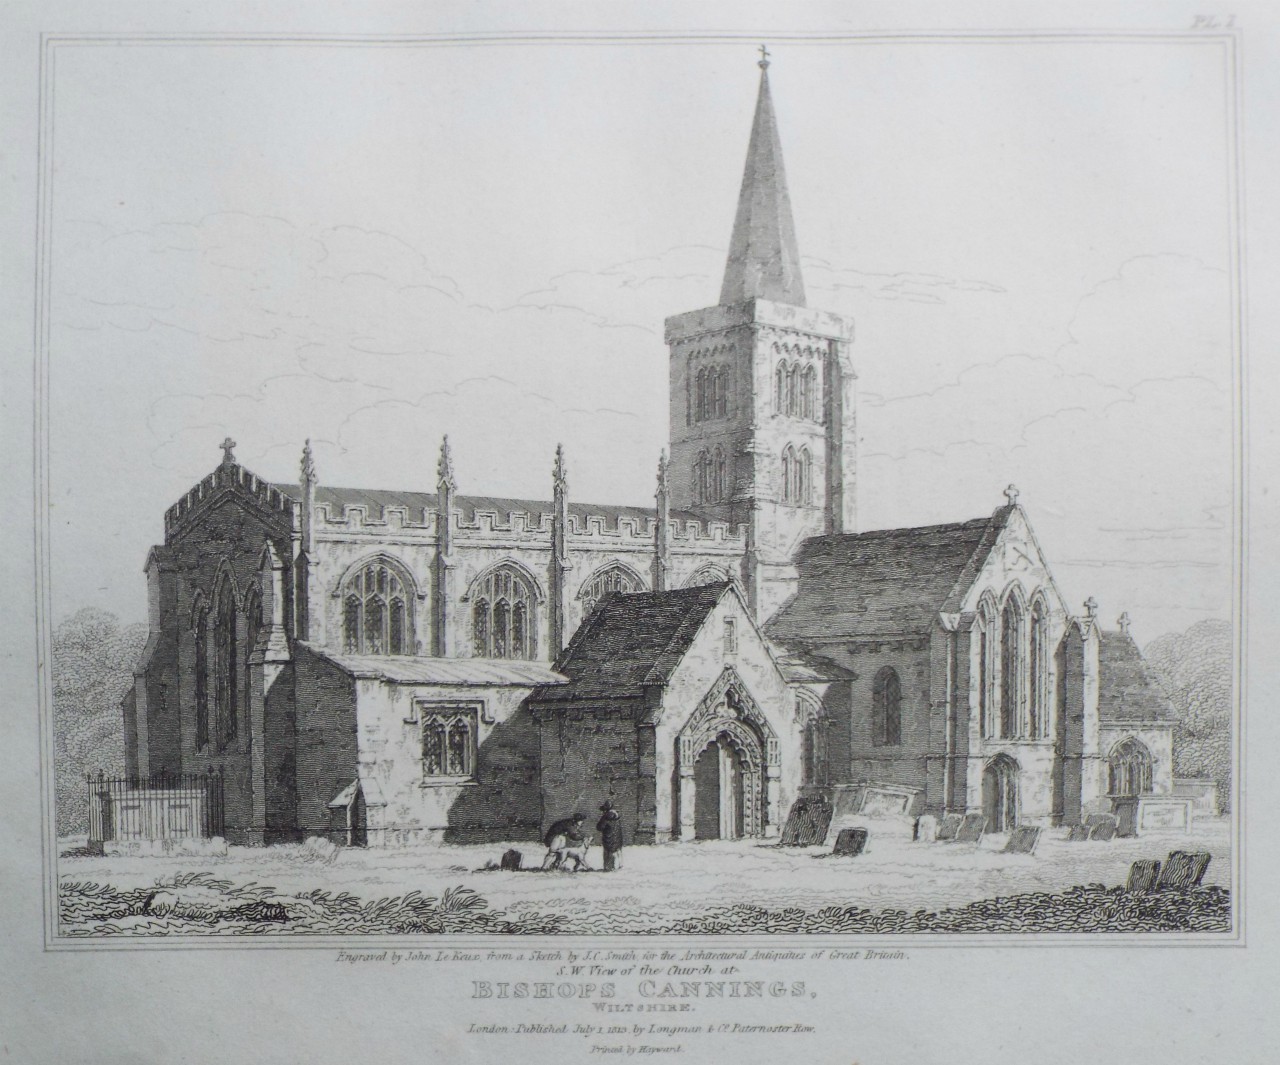 Print - S.W. View of the Church at Bishops Cannings, Wiltshire. - Le